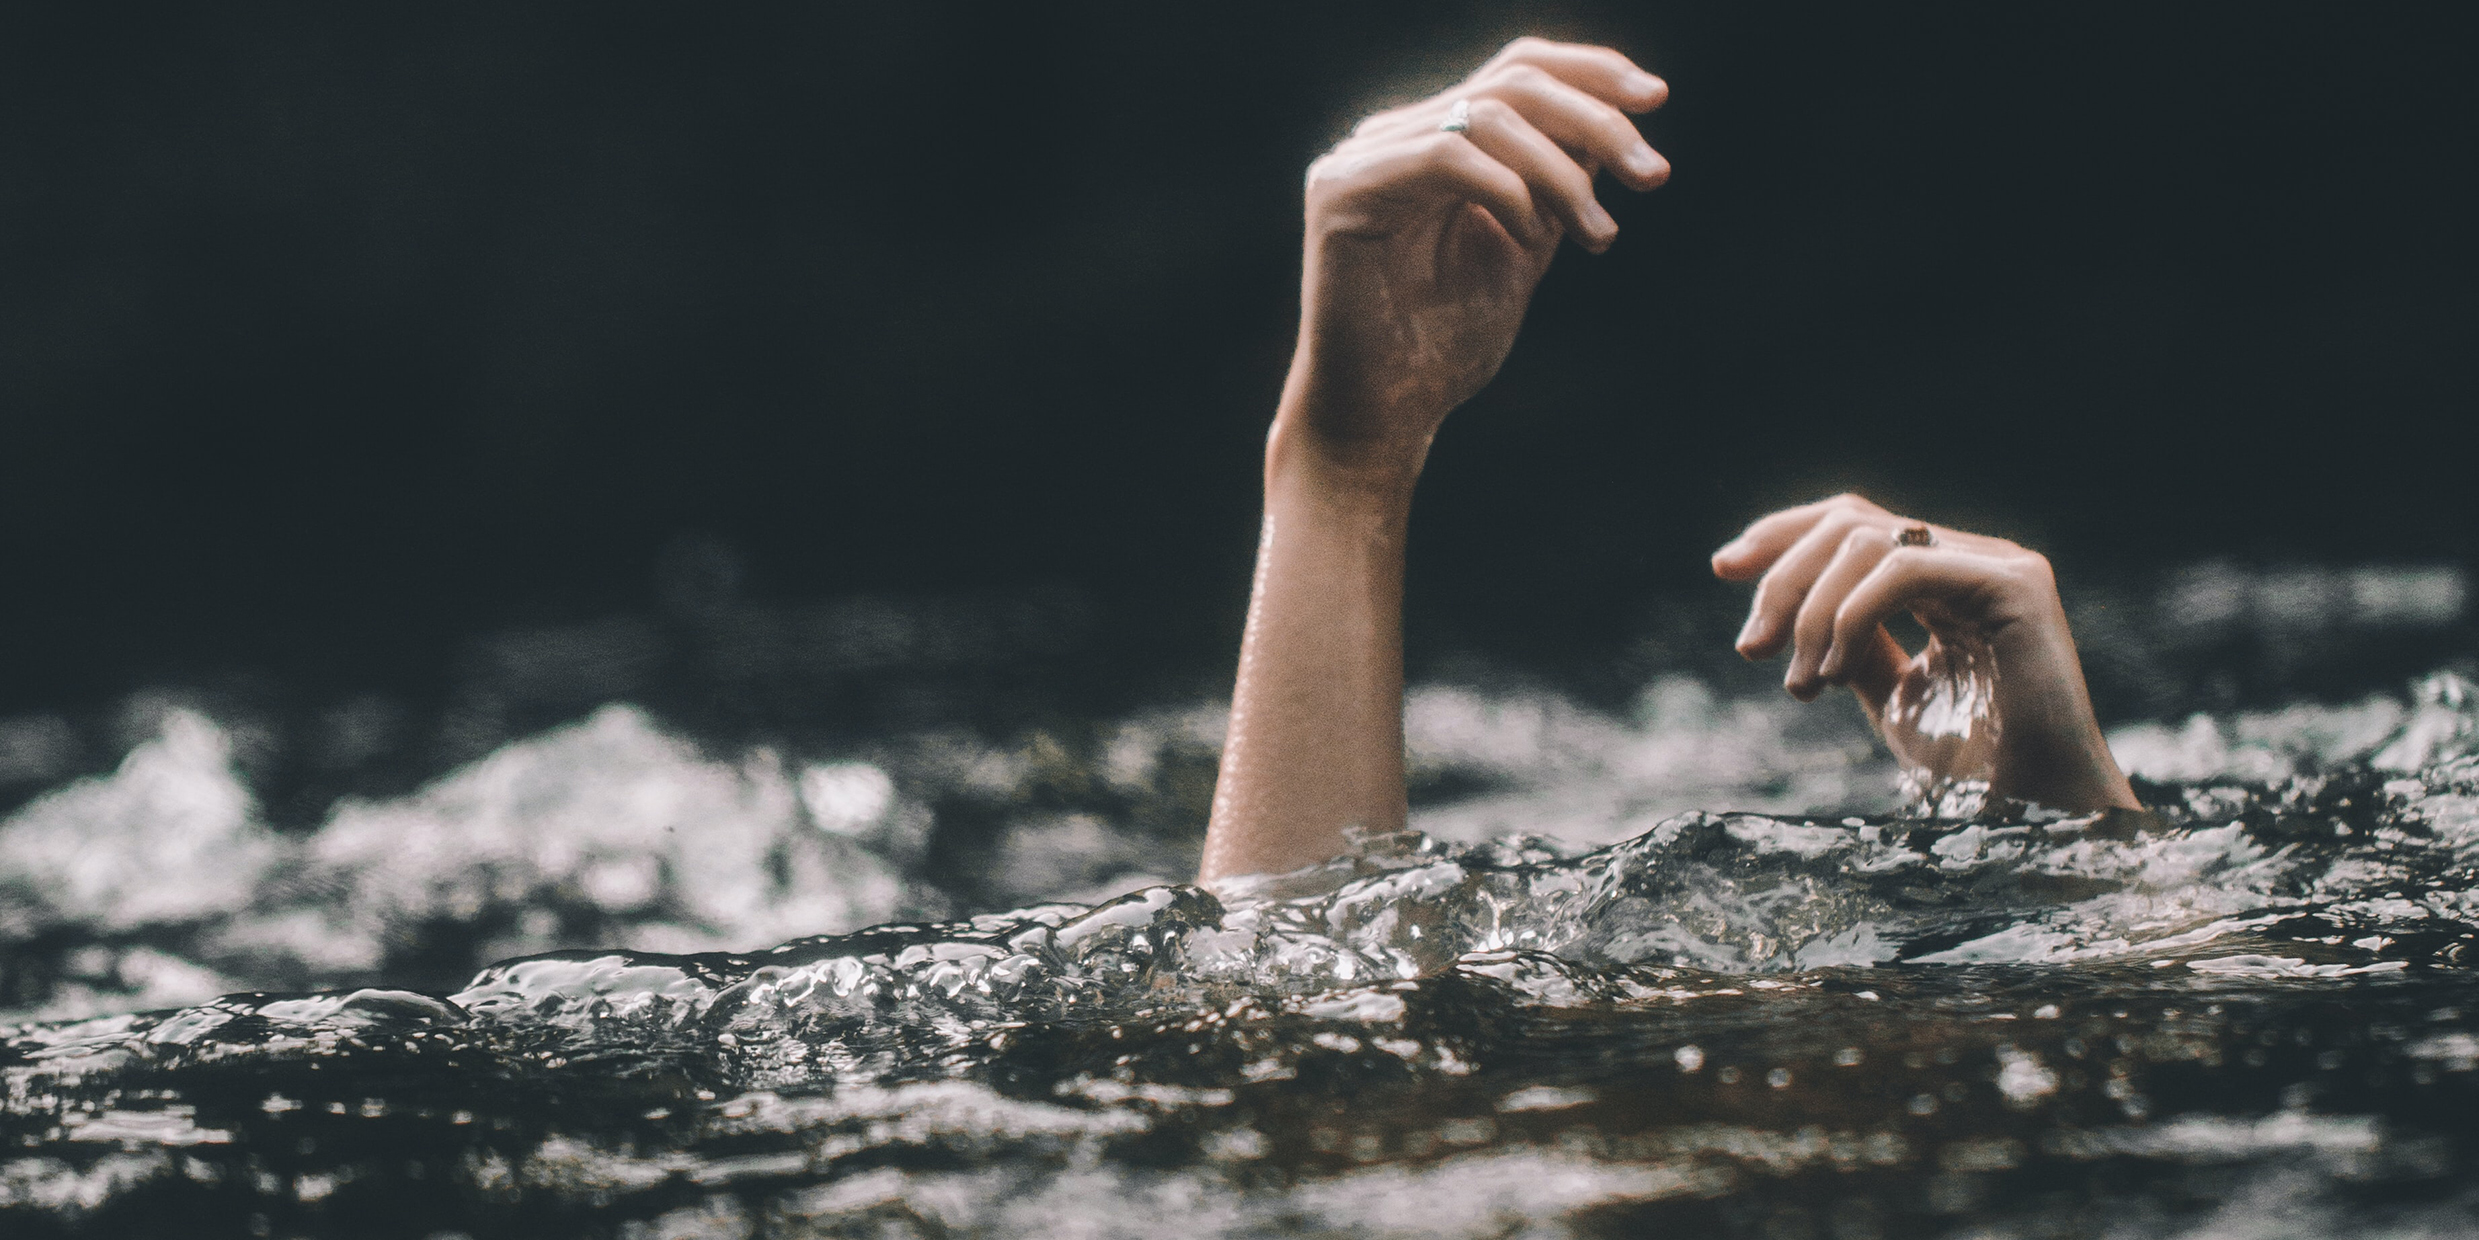 Image of hands reaching up from below the surface of water